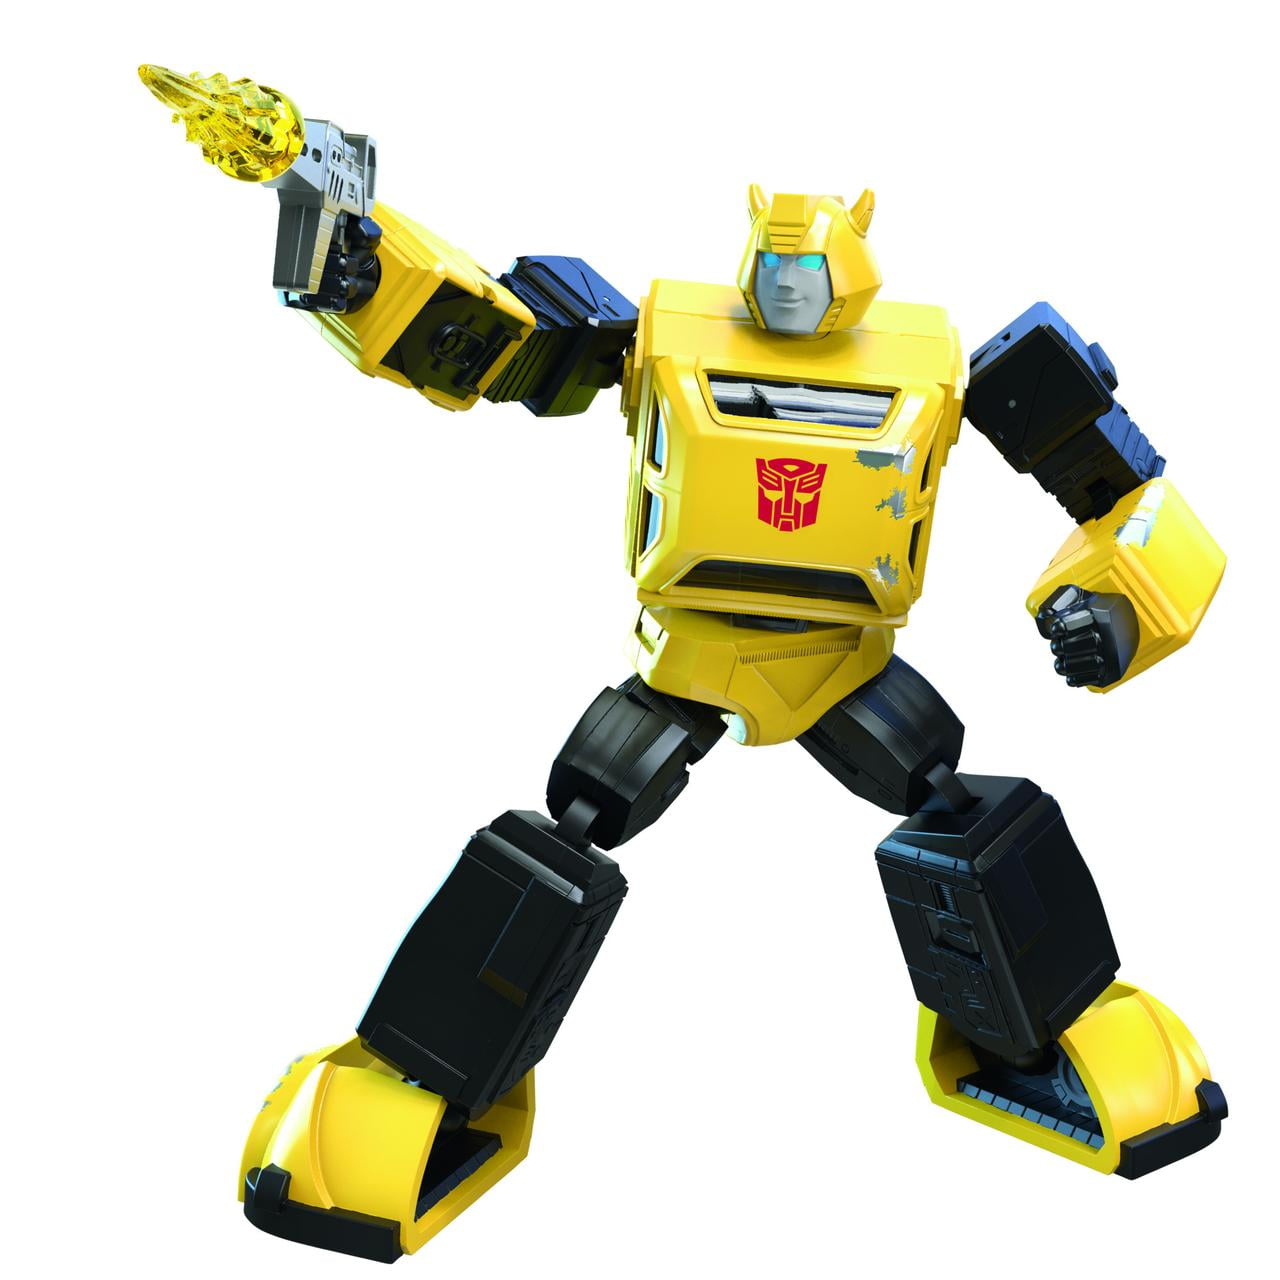 Wal-mart Exclusive Transformers Bumblebee g1 